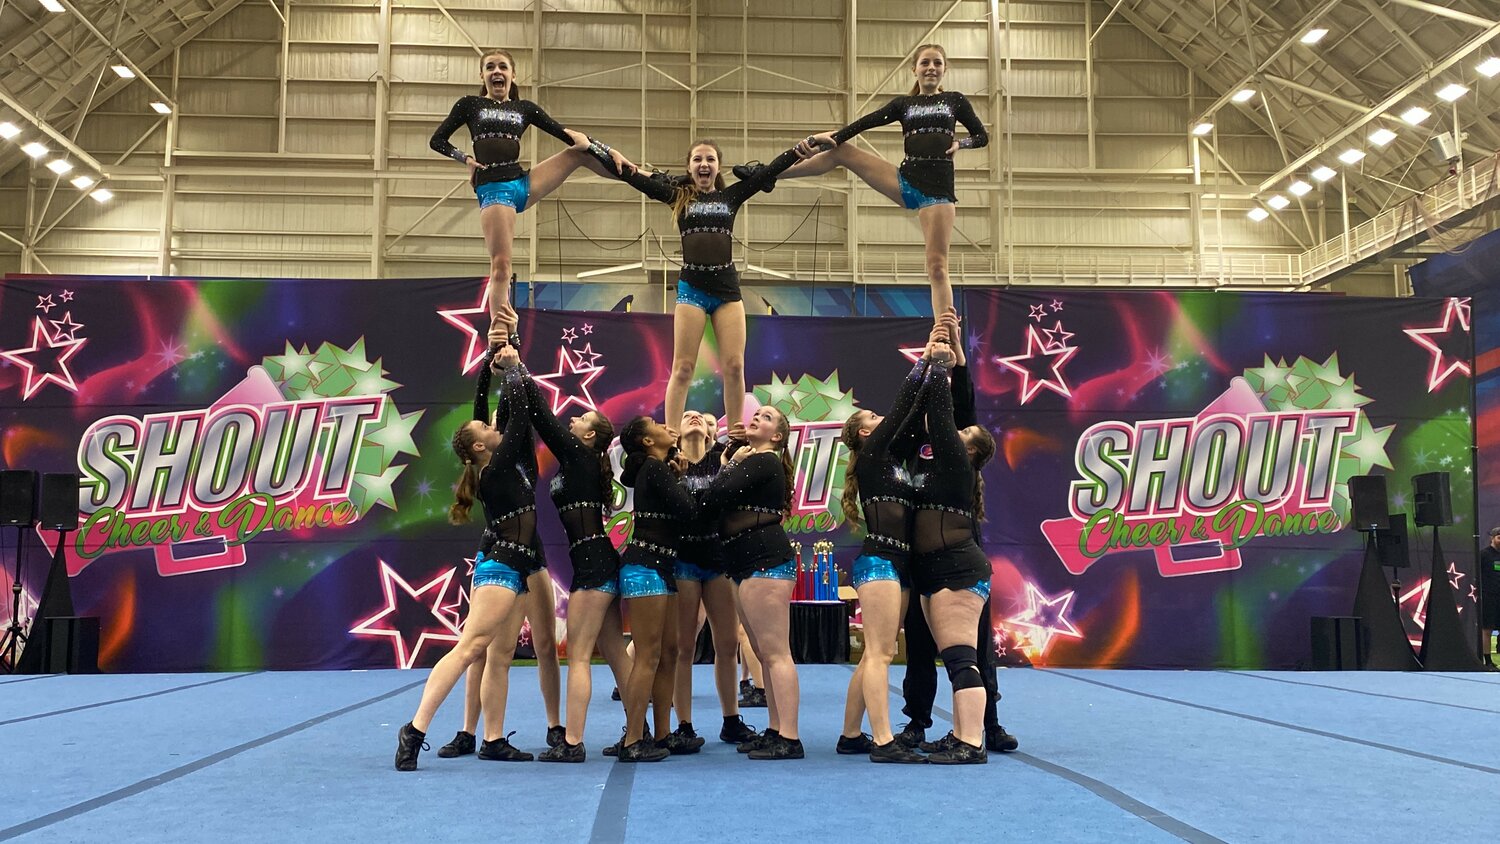 Members of the Mavericks Competitive Cheer Program Special Ops team, for youth ages 12 and under, perform recently. The Mavericks Competitive Cheer Program won big at a national event in Buffalo and now has its sights set on international competitions.